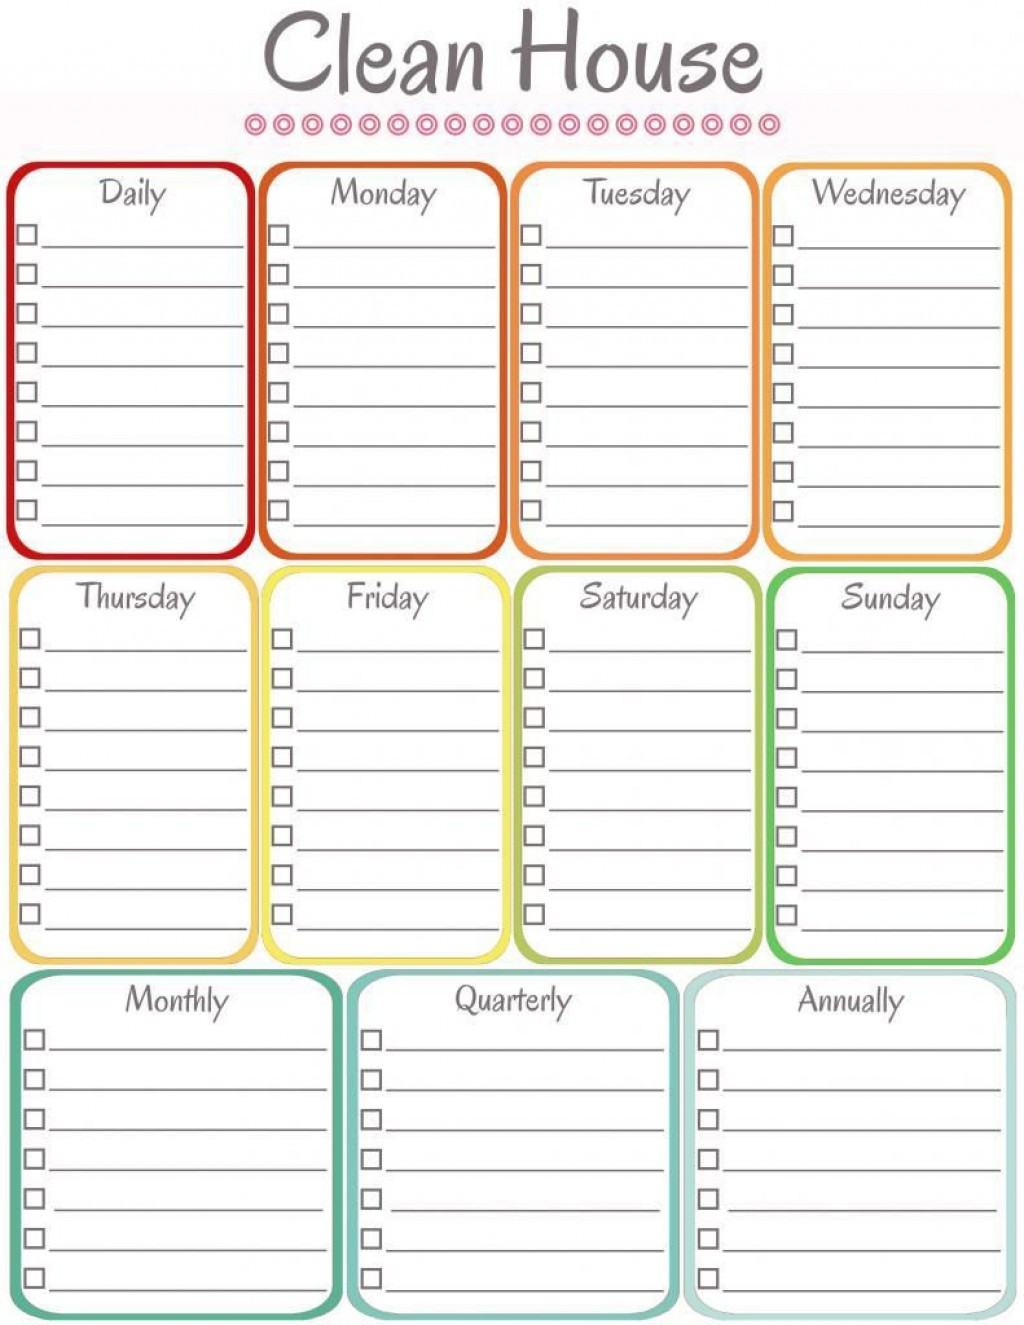 Weekly Cleaning Schedule Template Weekly Cleaning Schedule Template Addictionary